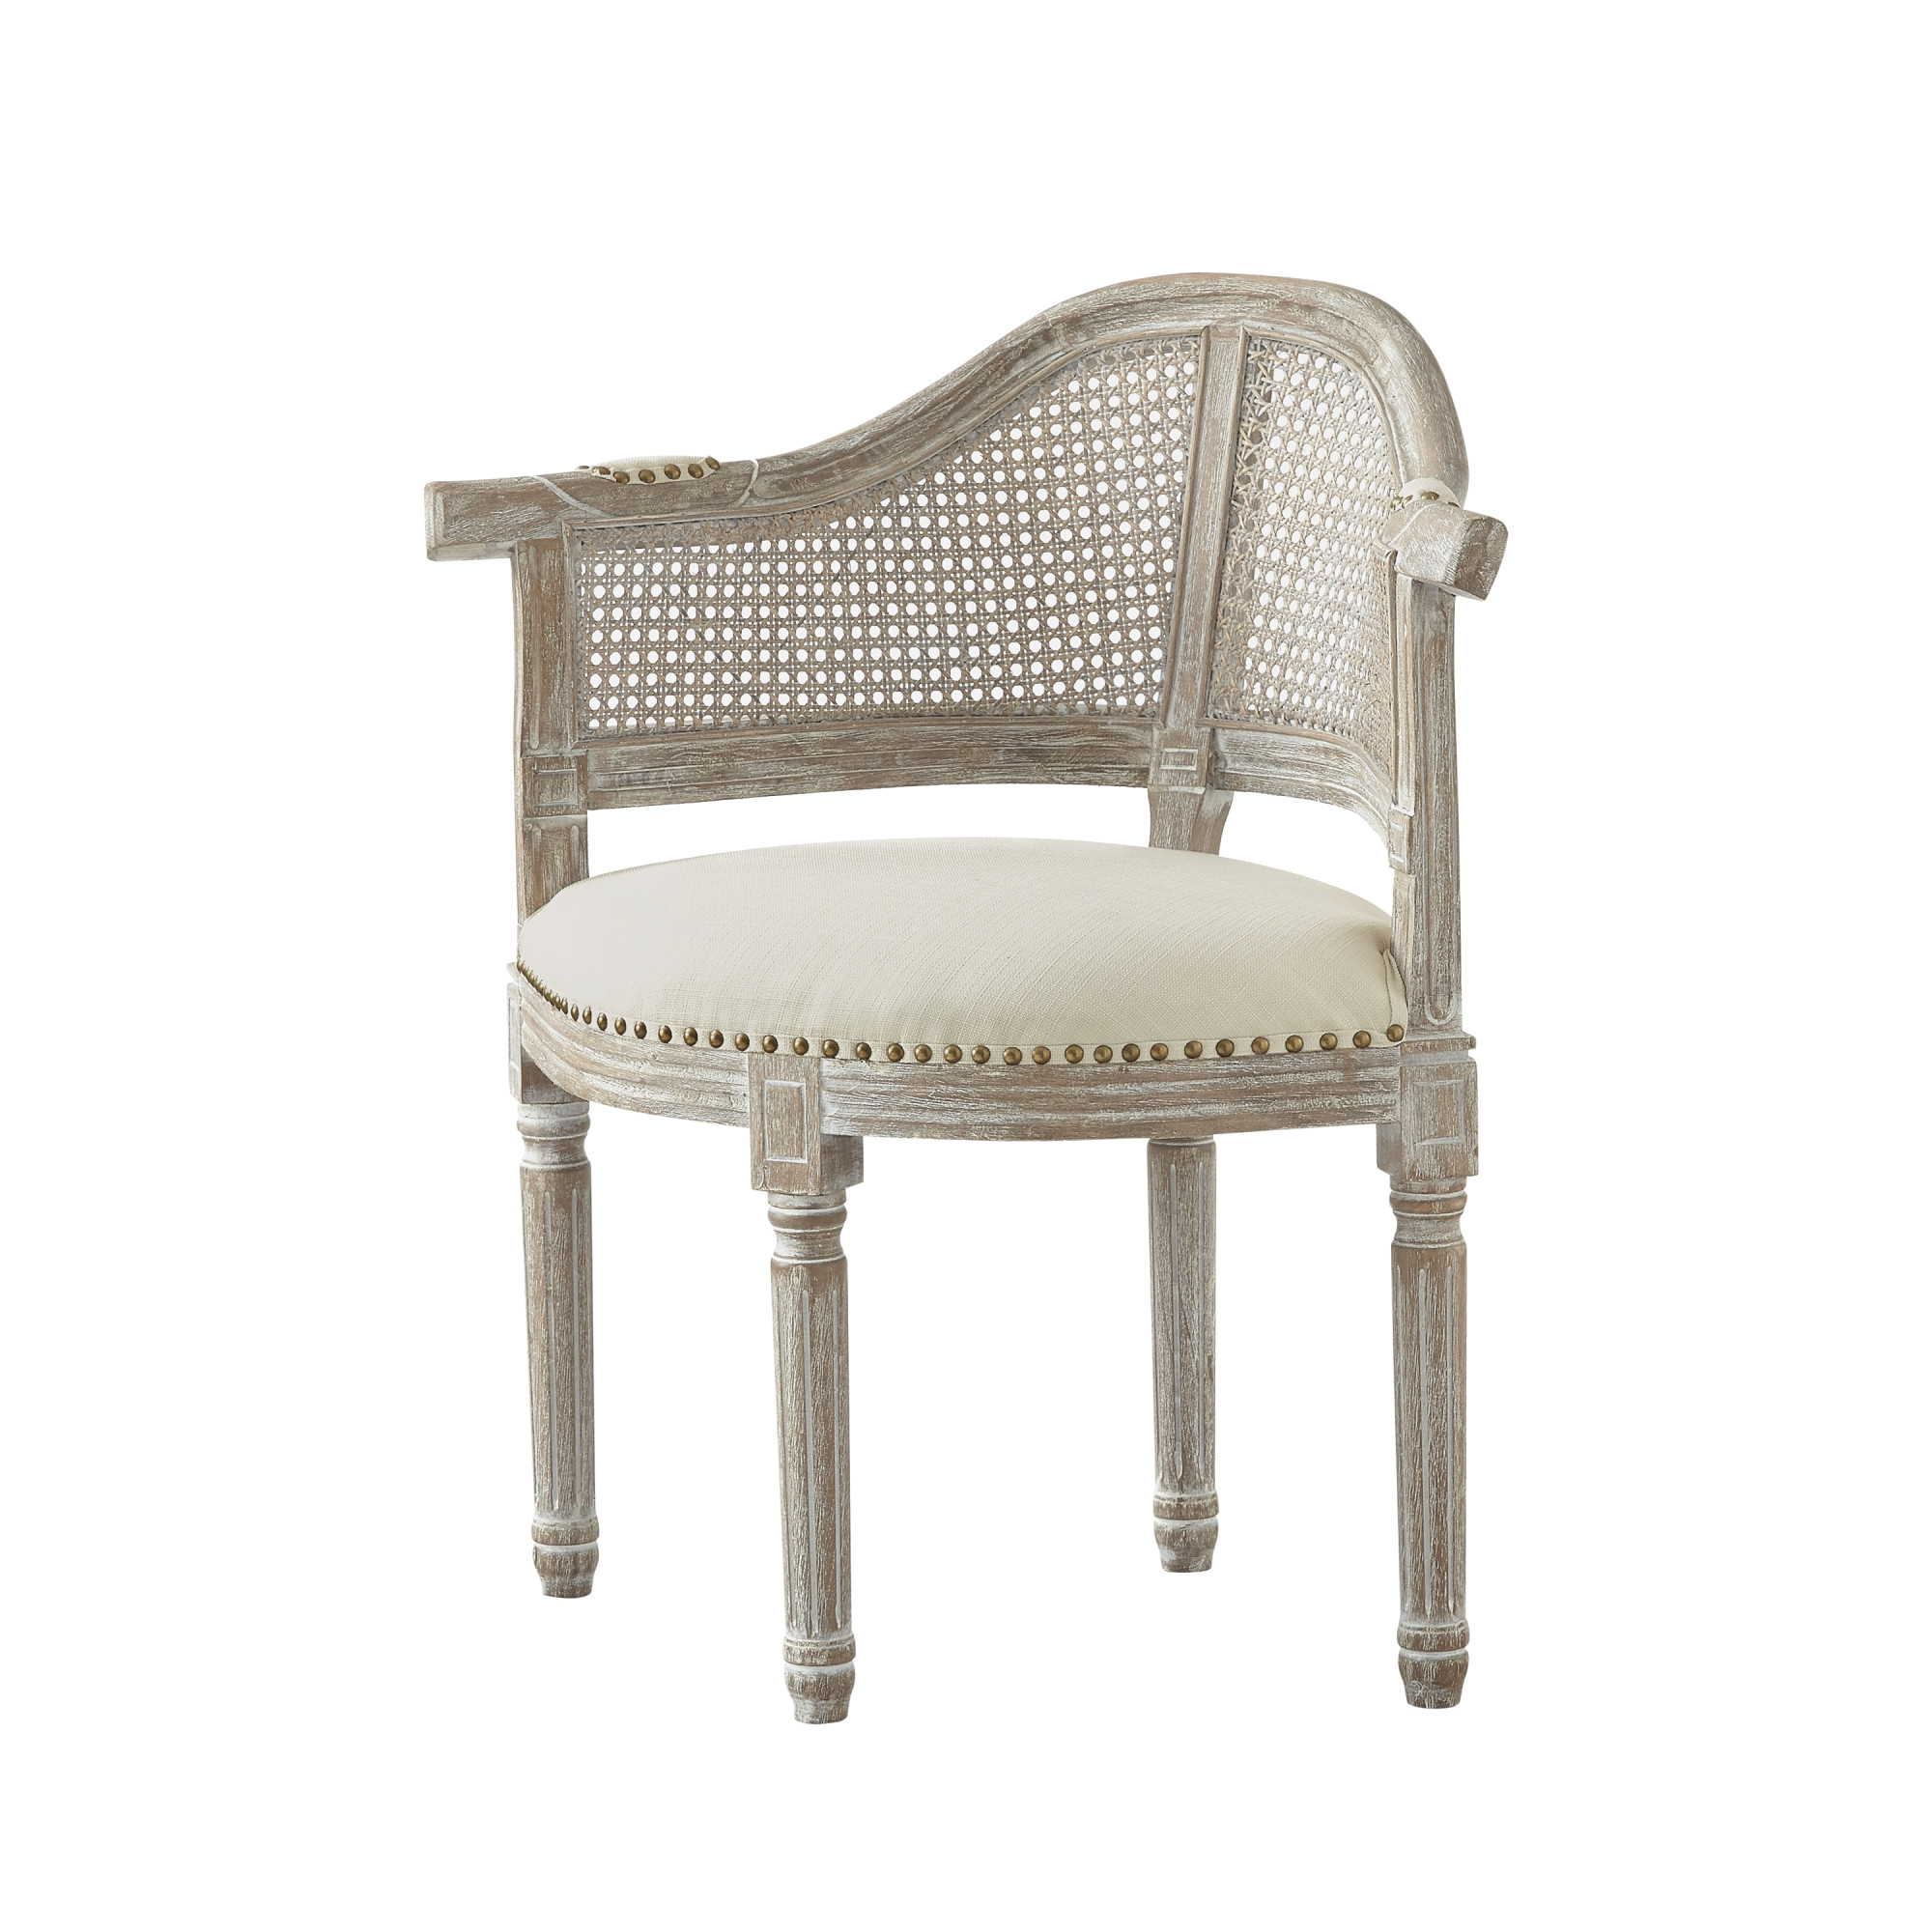 24" Cream And Beige Linen Arm Chair-533998-1